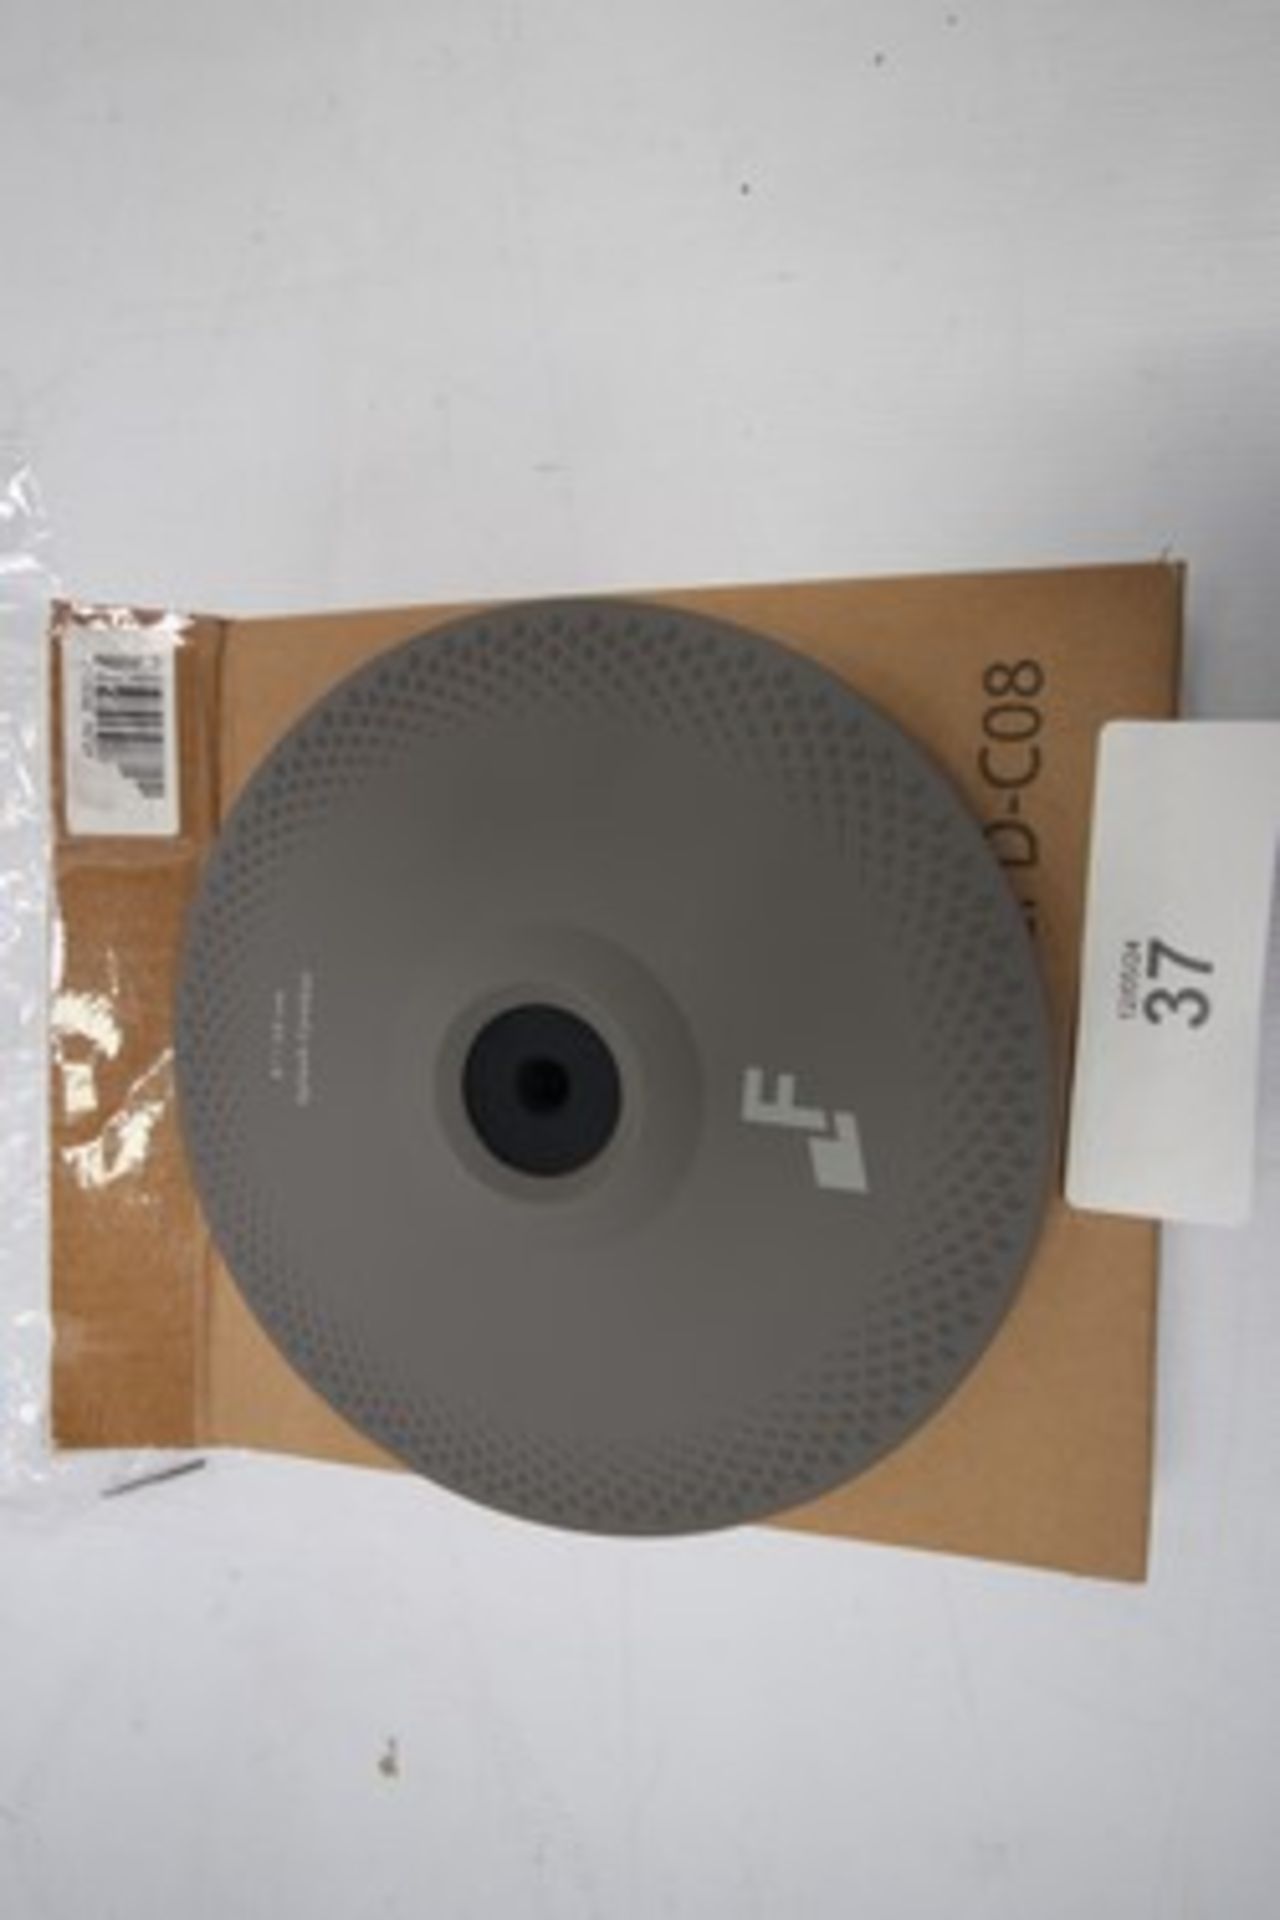 1 x Efnote 8" electro drum cymbal, model No: EFD-C08 - new in box (ES5) - Image 2 of 2